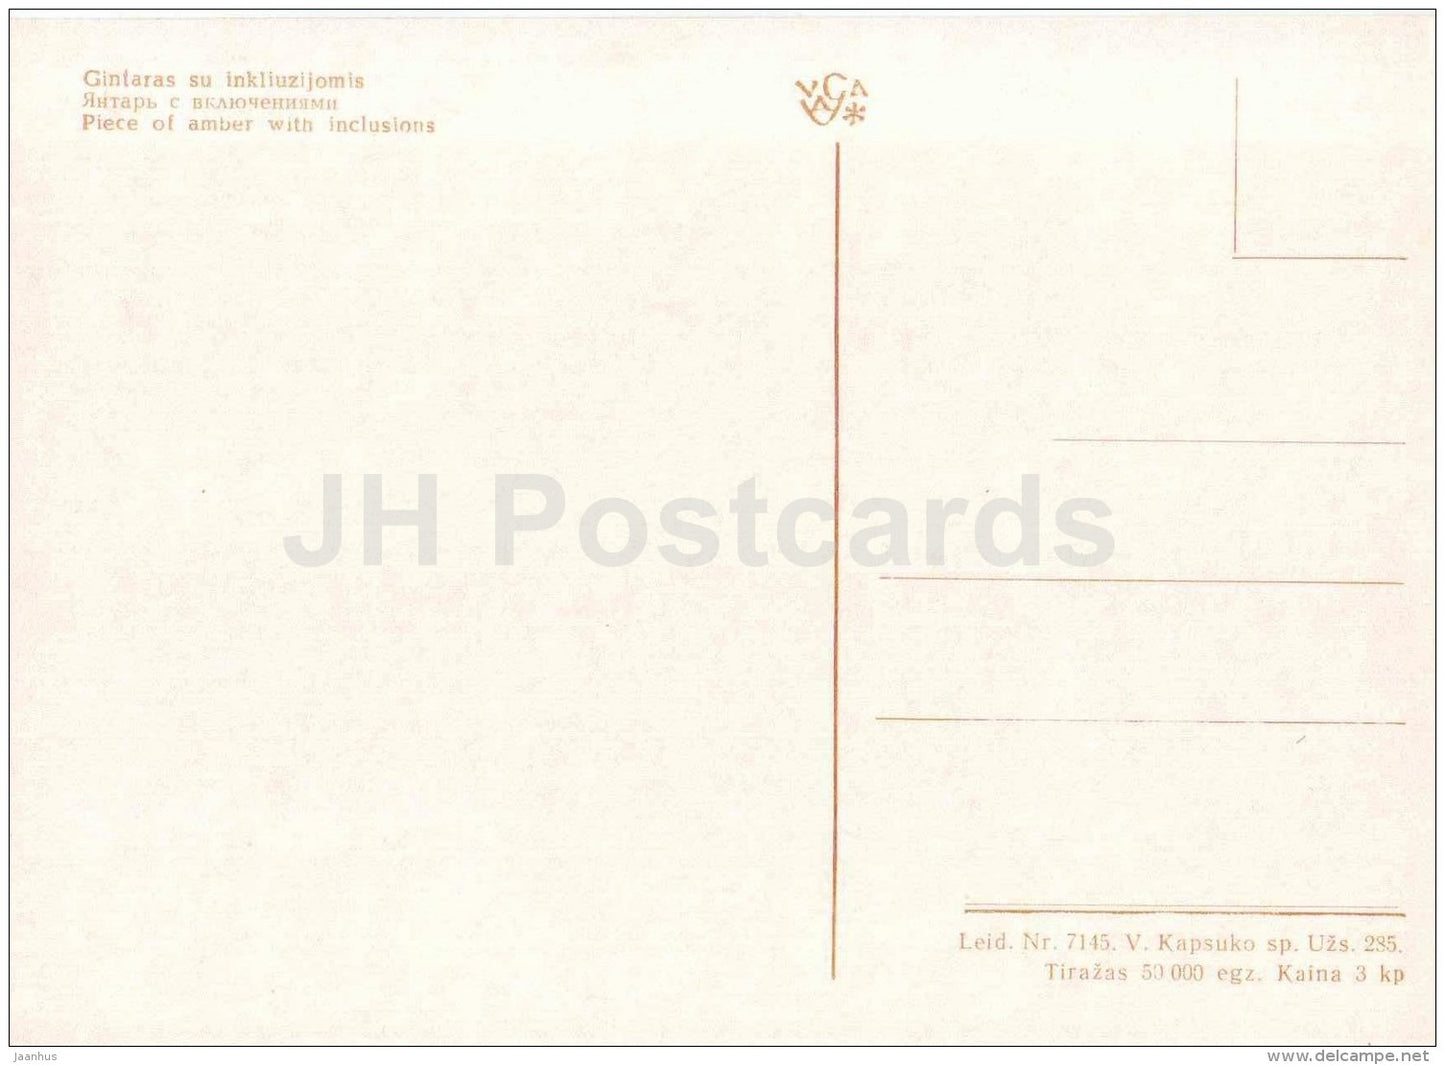 Piece of Amber with Inclusions - 1 - Amber - Gintaras - 1973 - Lithuania USSR - unused - JH Postcards